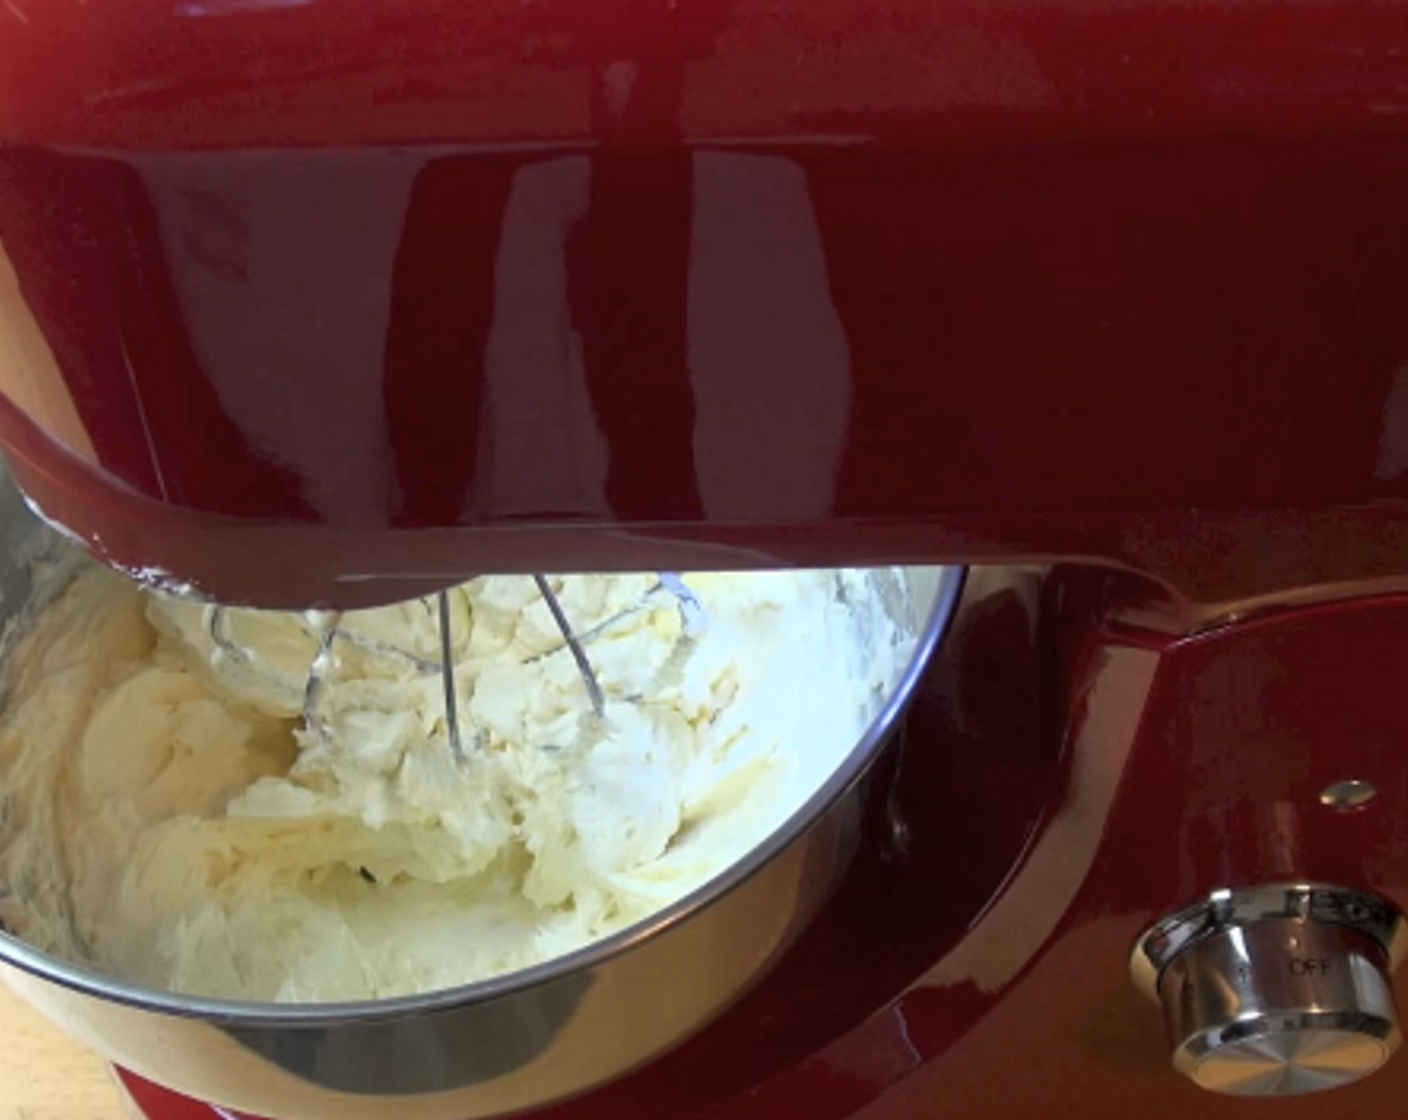 step 2 In the bowl of a stand mixer, add Philadelphia Original Soft Cheese (1 2/3 cups), Caster Sugar (1/3 cup), and Vanilla Extract (1/2 Tbsp), then beat until smooth. Add in Whipping Cream (1/2 cup) and beat again.